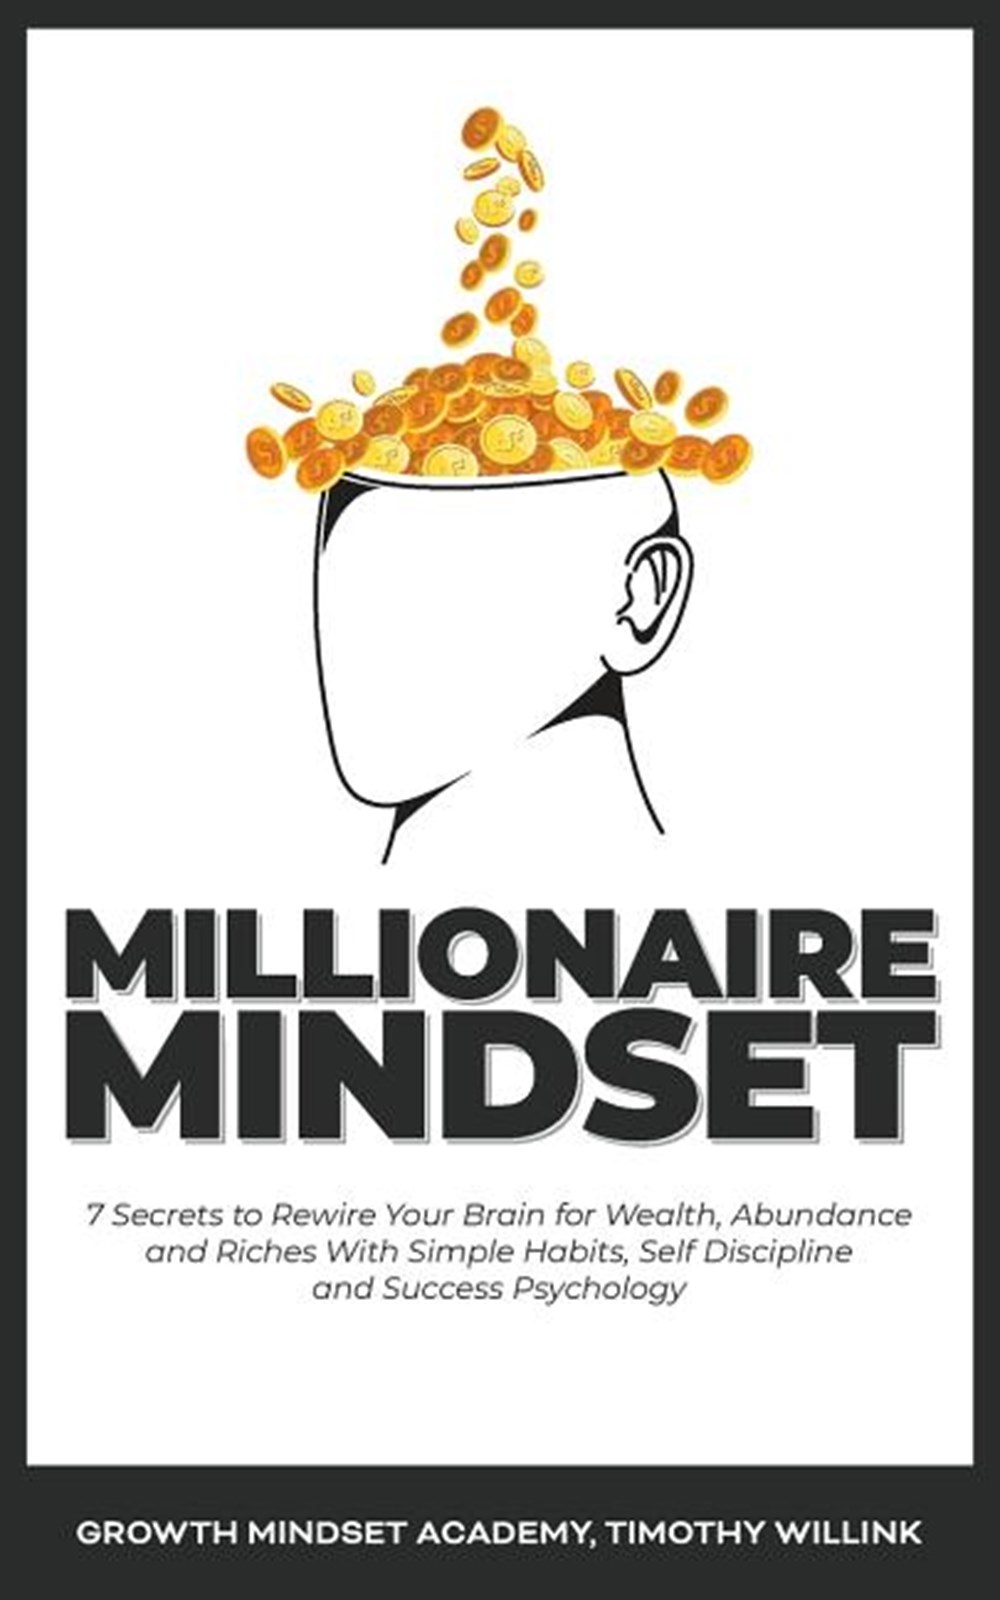 Millionaire Mindset: 7 Secrets to Rewire Your Brain for Wealth, Abundance and Riches With Simple Hab